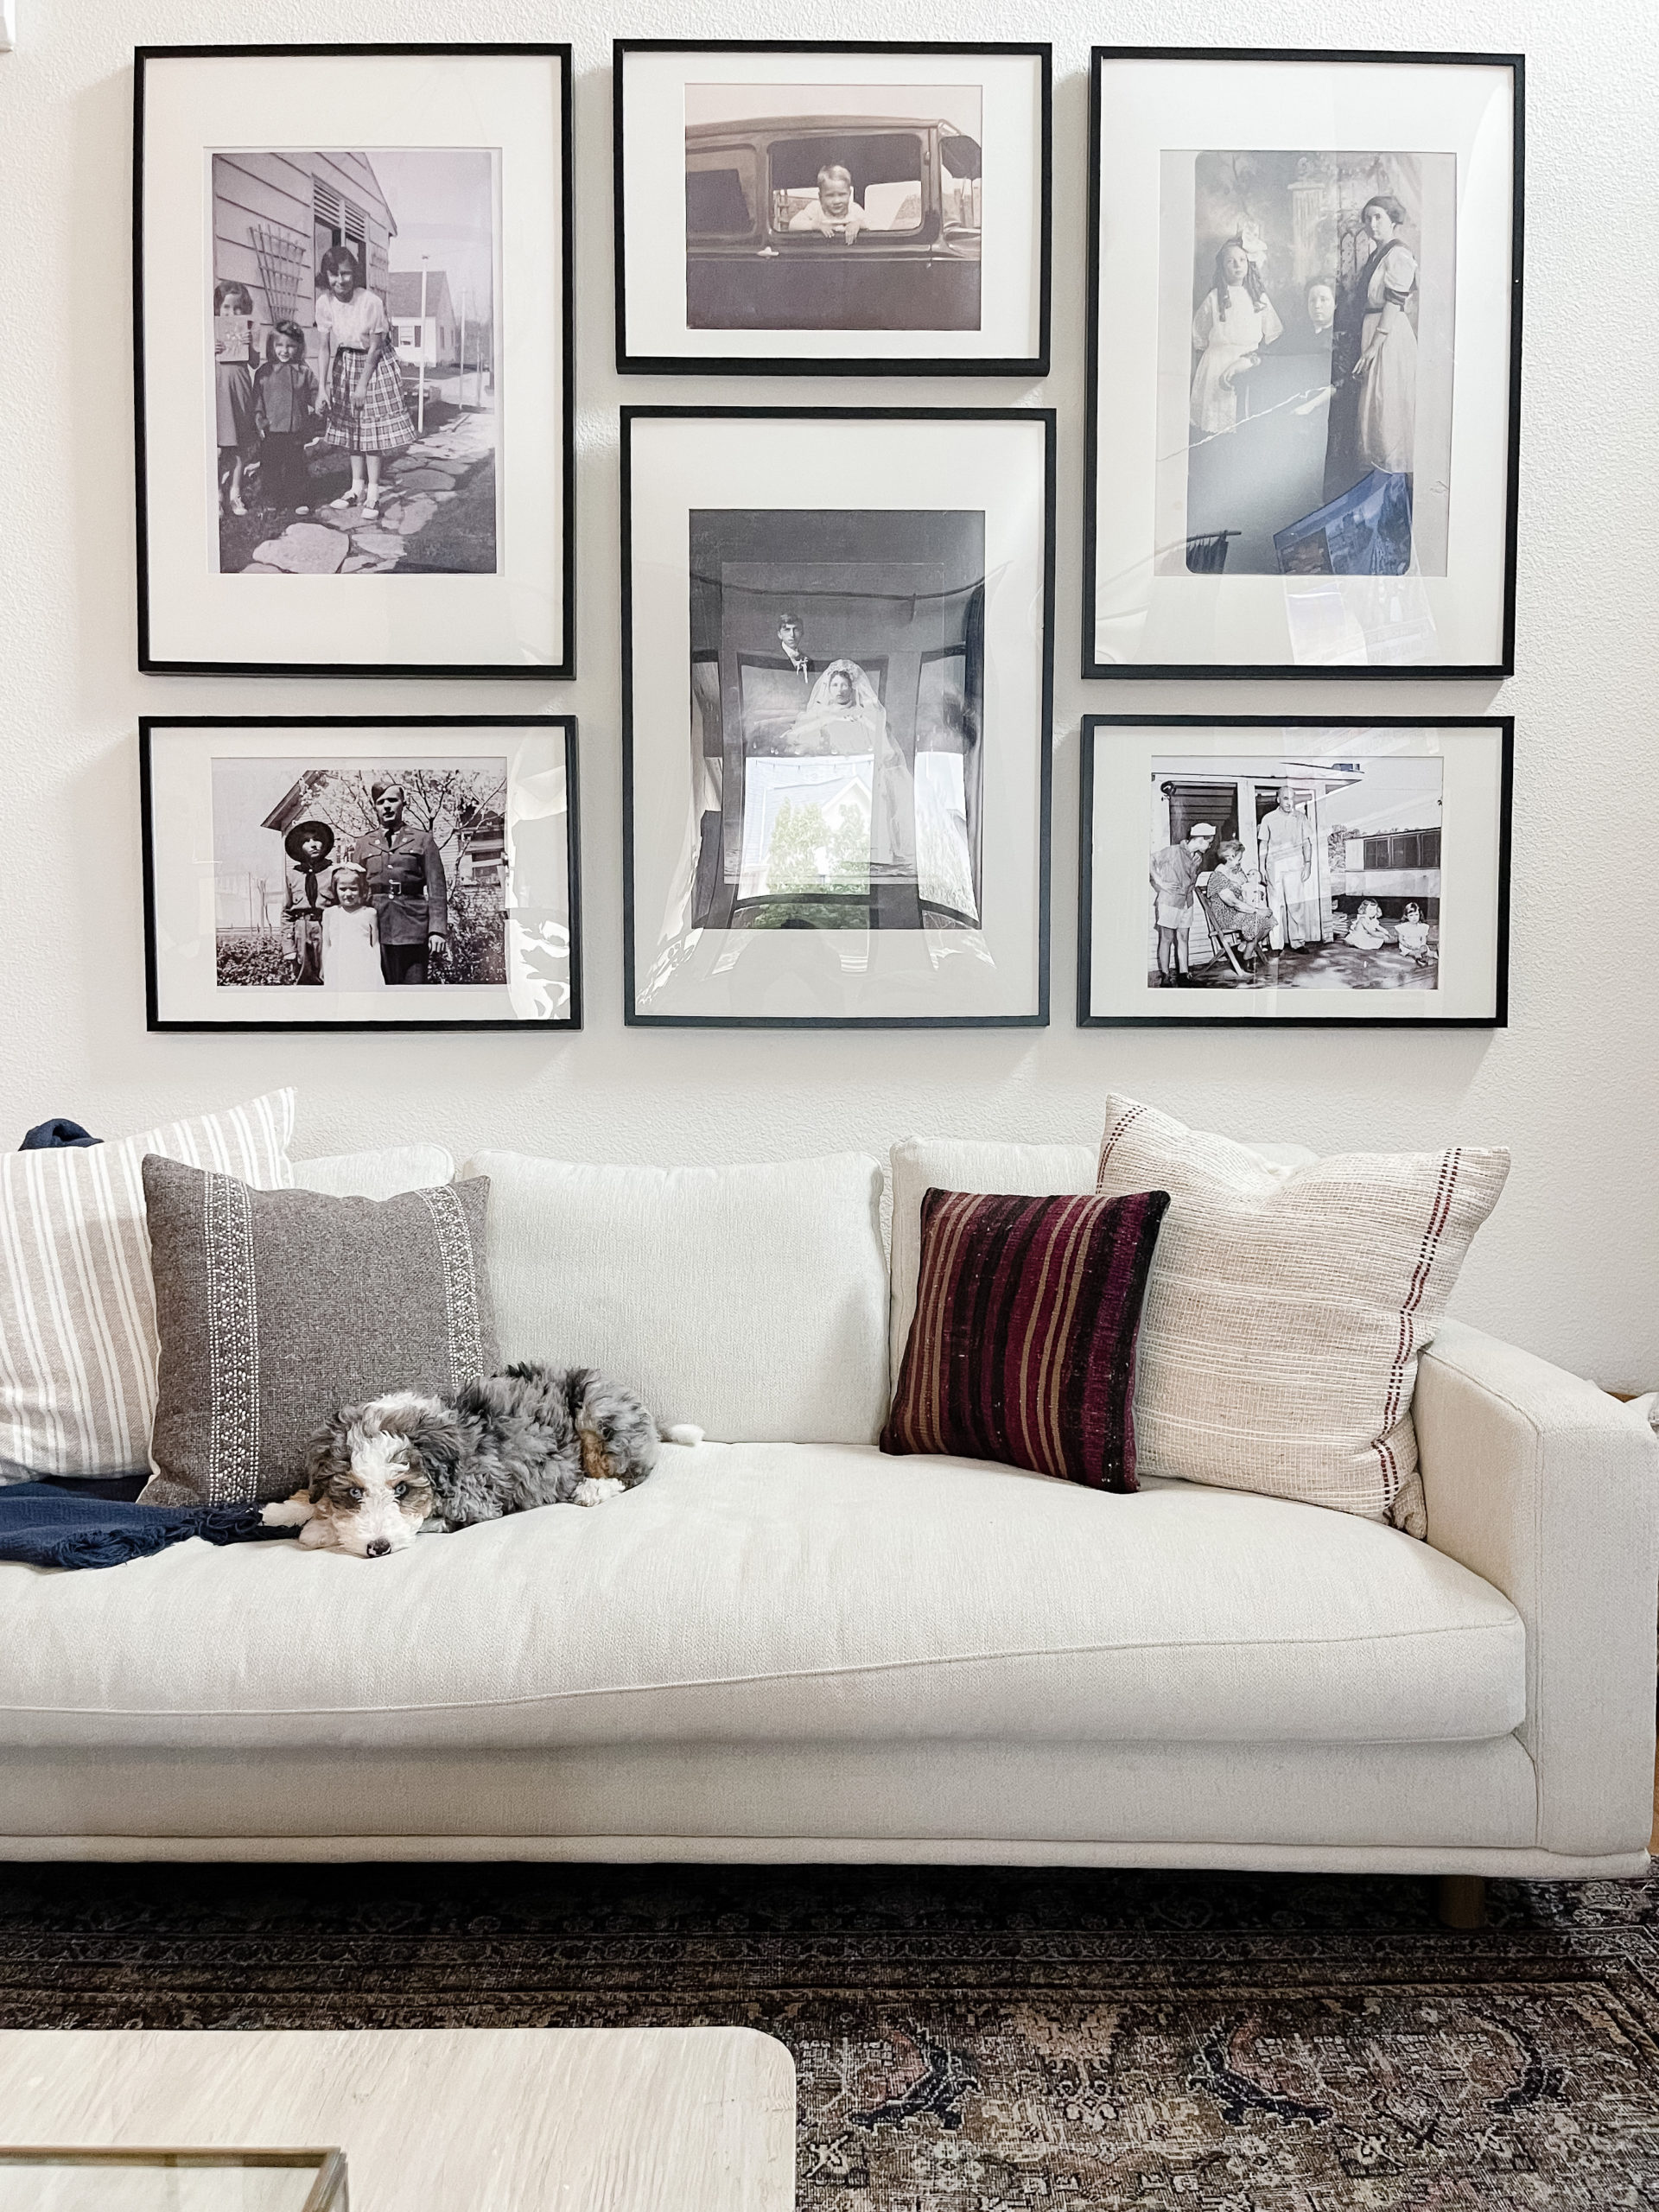 Pet friendly couch | Pet friendly materials | Stain resistant | Home decor | Interior design tips |